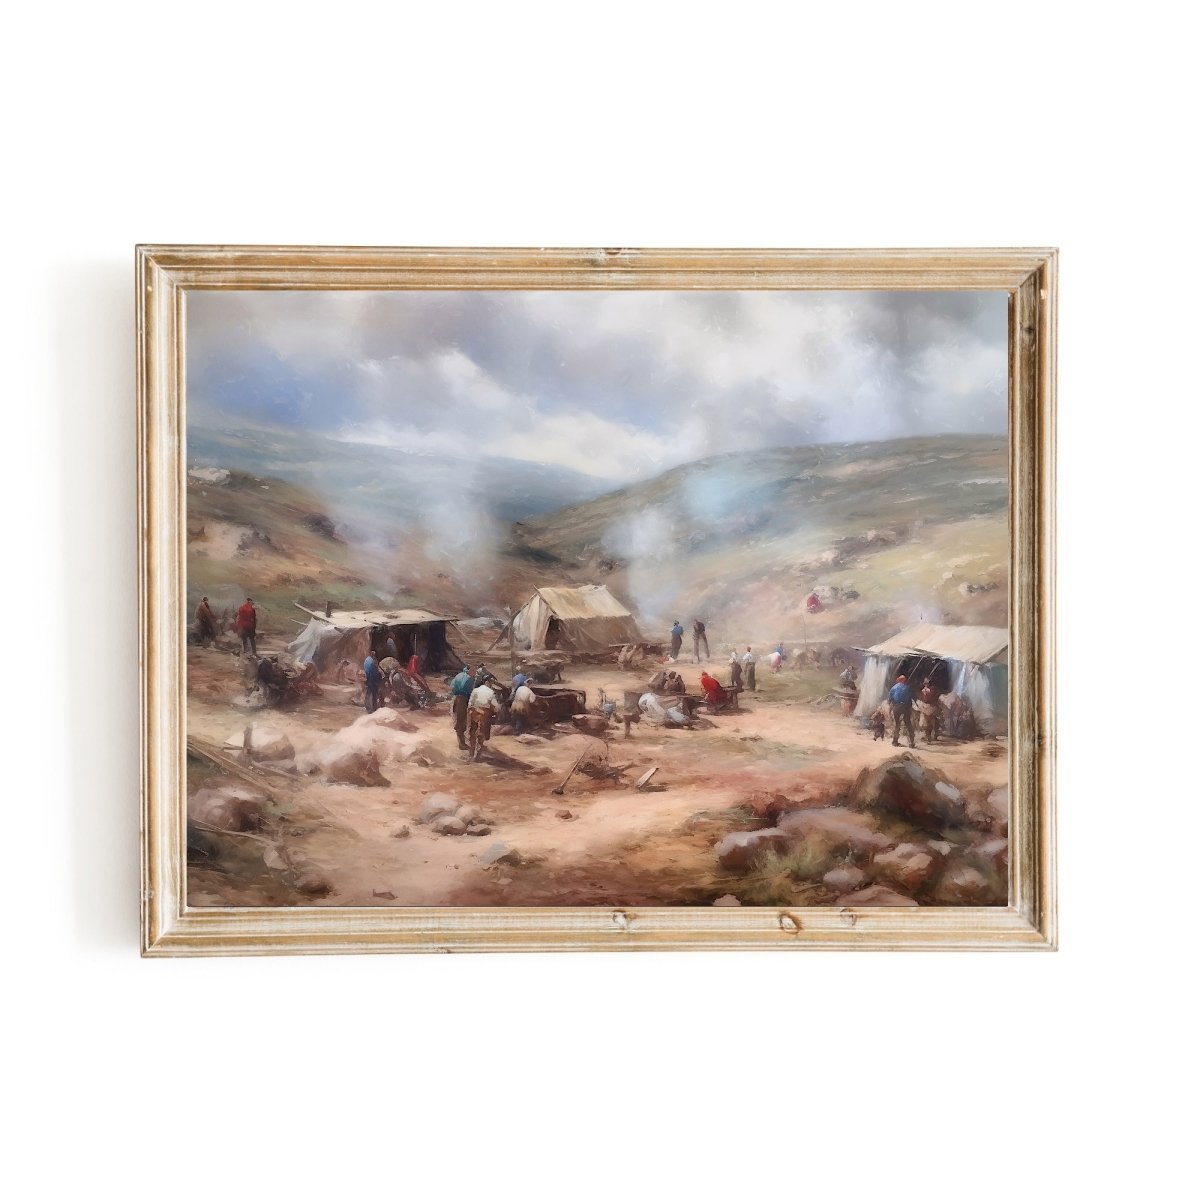 Vintage Wild West Wall Art Small Settler Camp in the Frontier, Pioneer days - Everything Pixel